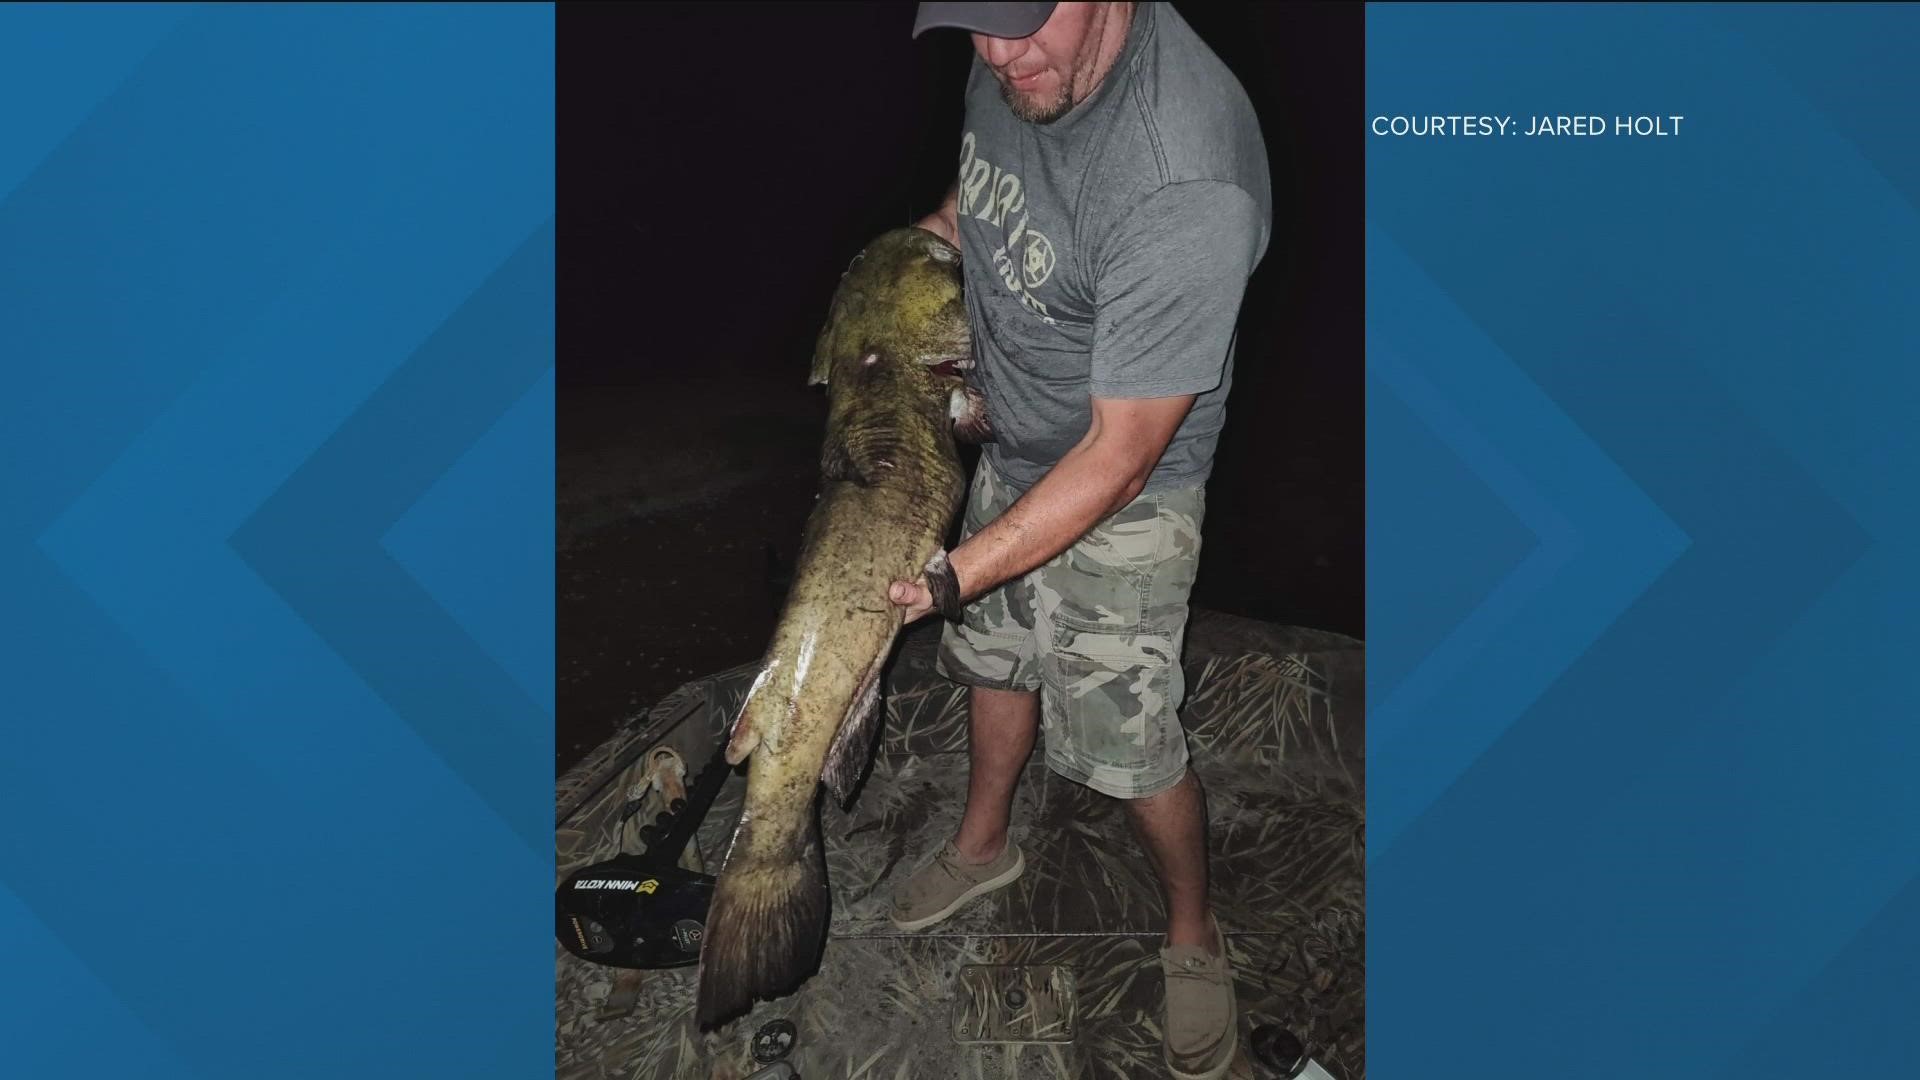 Jared Holt hauled up a 43-inch-long flathead catfish on July 9. It's a state catch-and-release record.